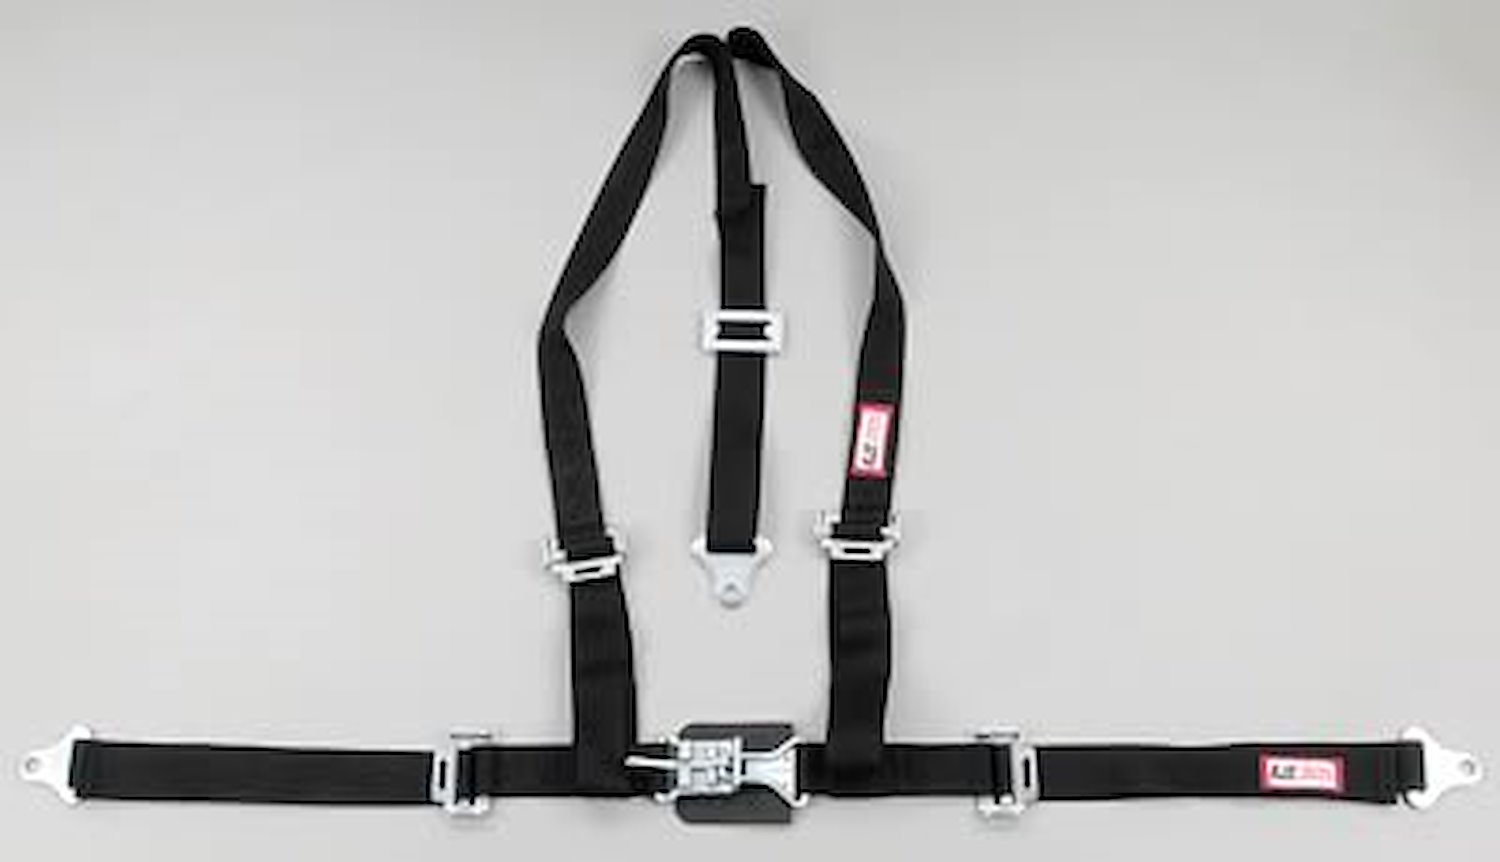 NON-SFI L&L HARNESS 3 PULL UP Lap Belt BOLT SEWN IN 2 S.H. Individual FLOOR Mount w/STERNUM STRAP WRAP/BOLT YELLOW